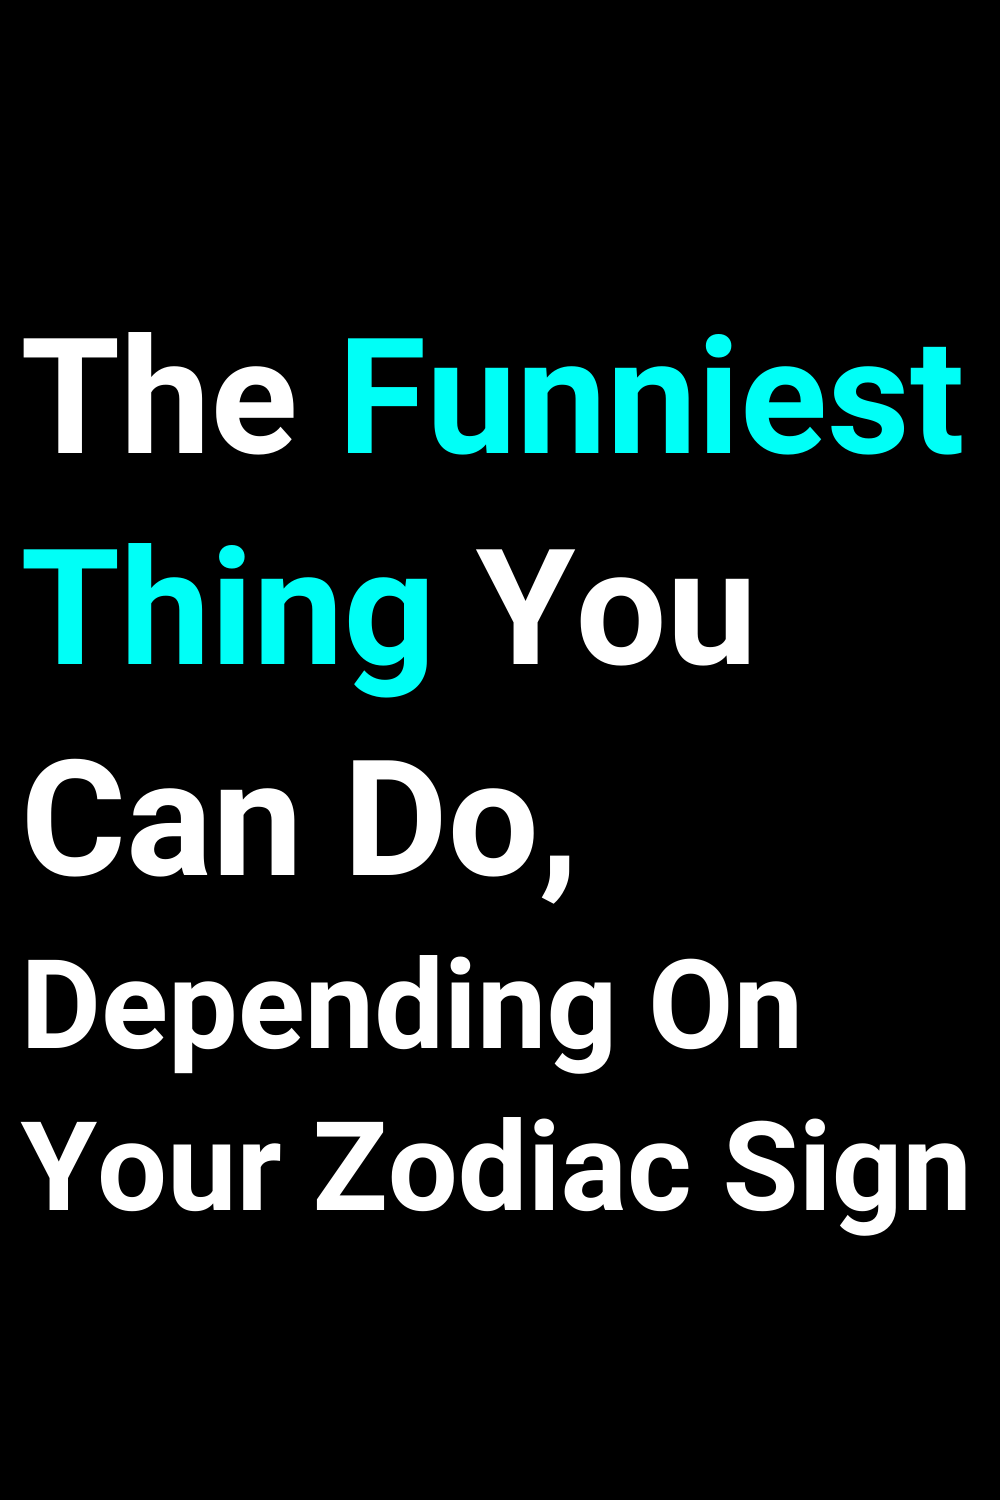 The Funniest Thing You Can Do, Depending On Your Zodiac Sign